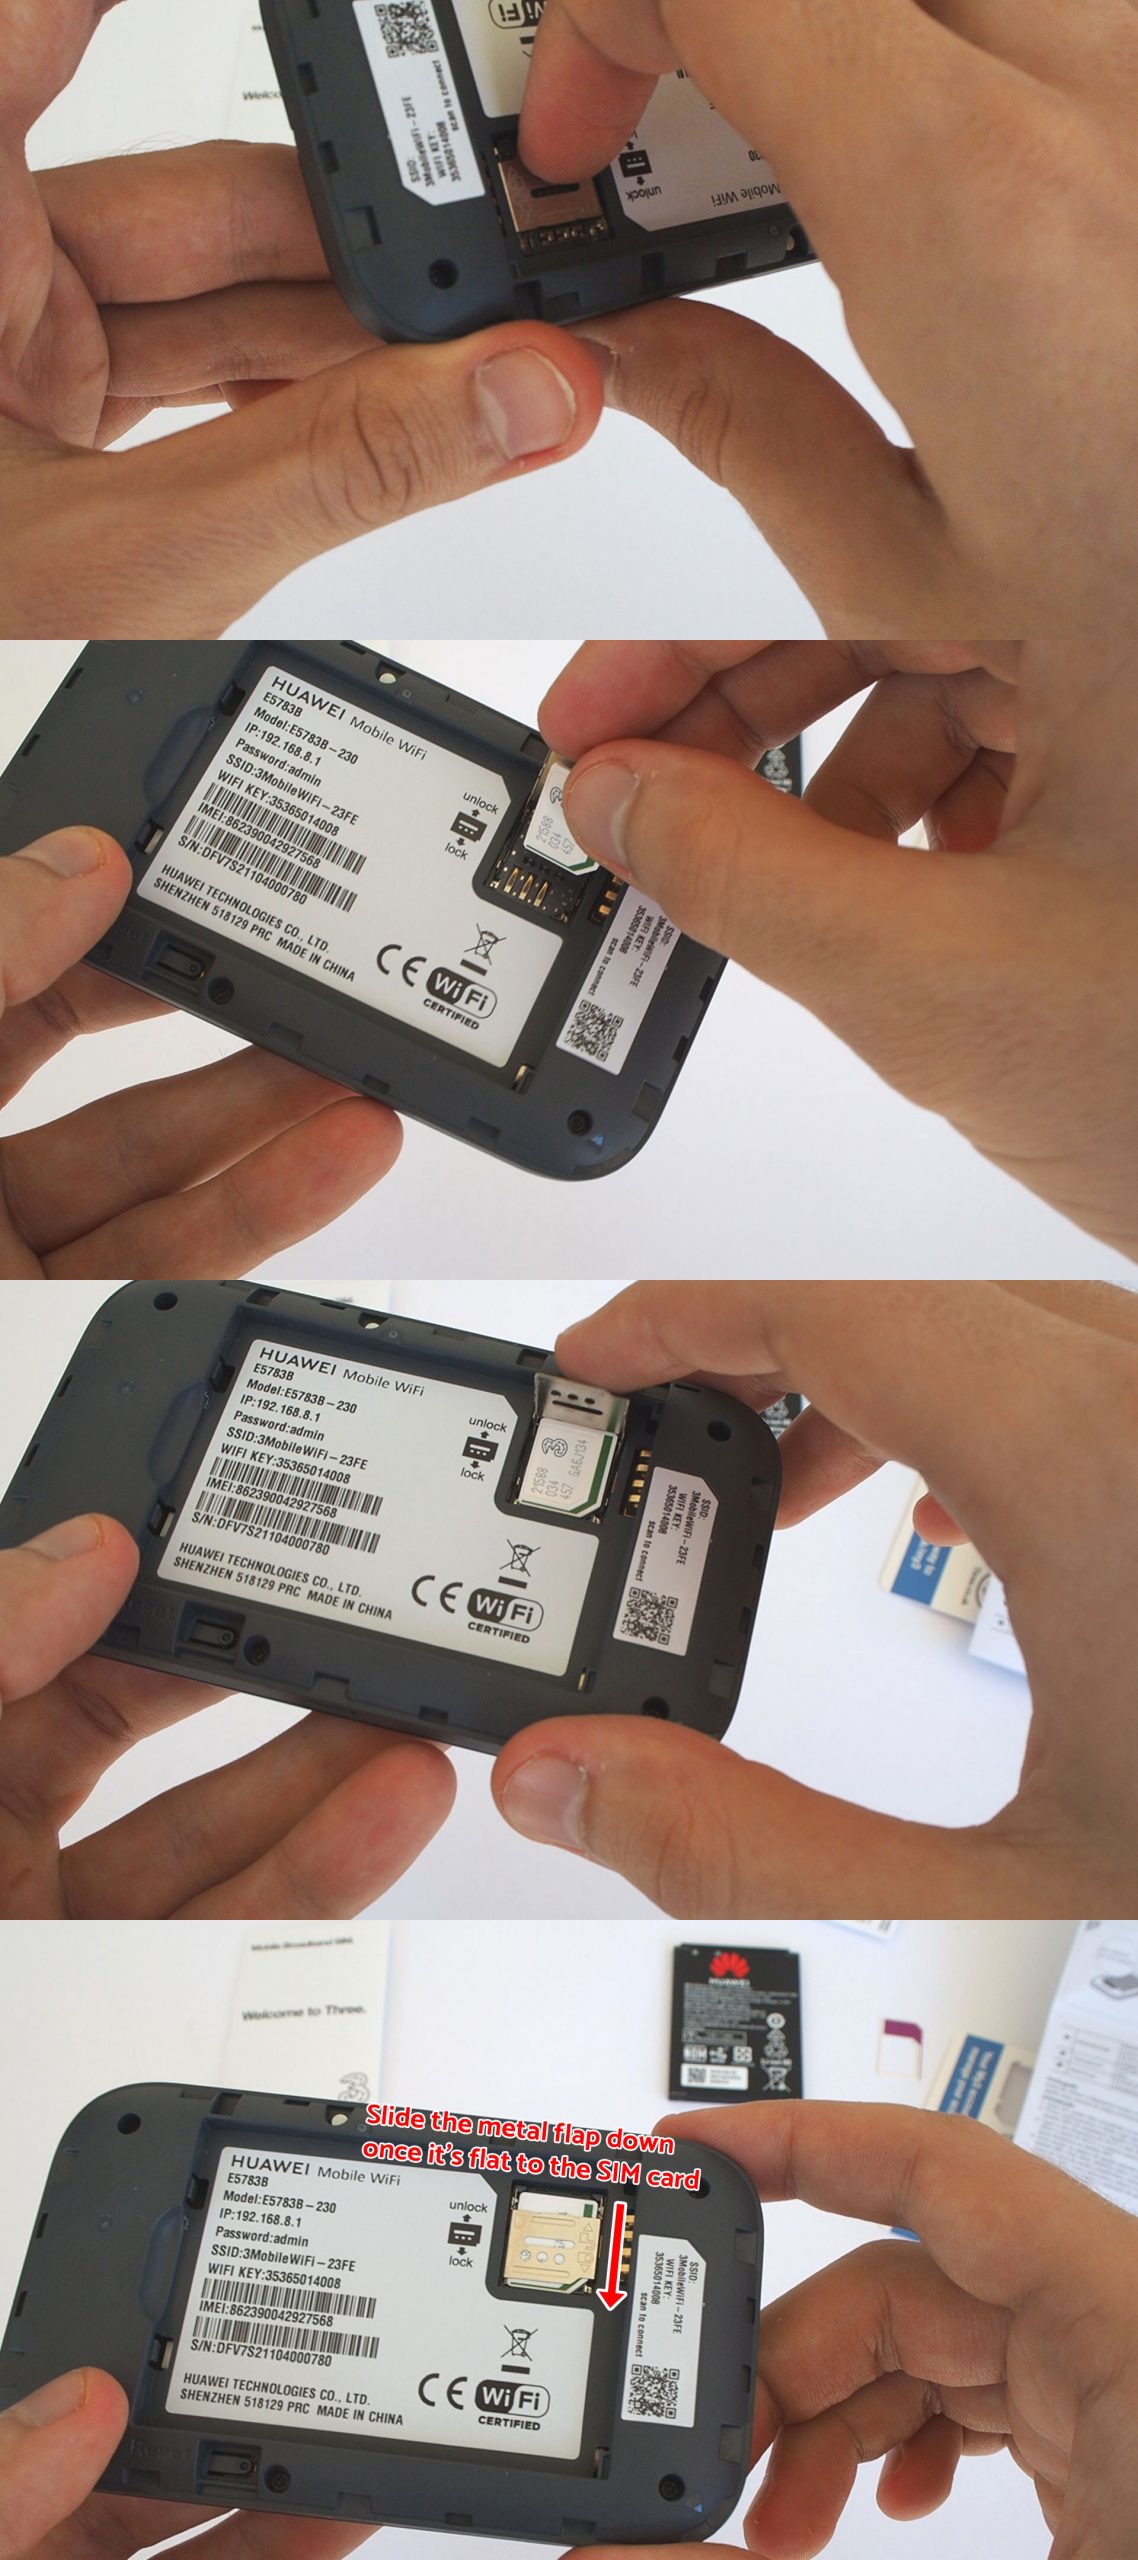 Inserting the SIM card into the Three MiFi device.